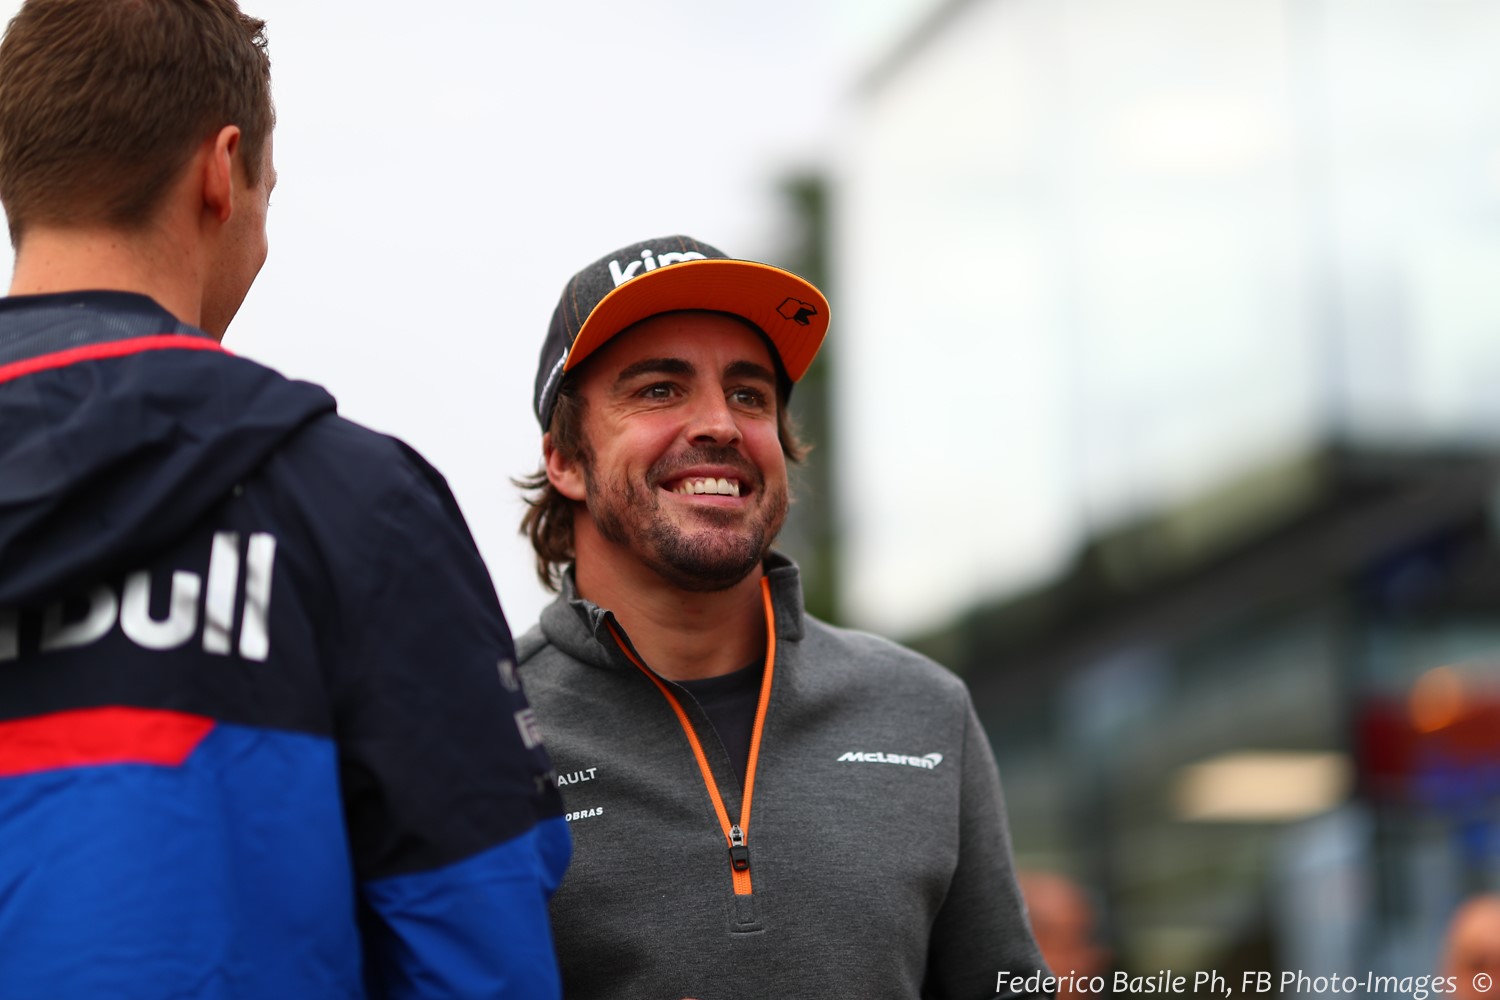 Alonso out-qualified Vandoorne at 100% of the races in identical cars